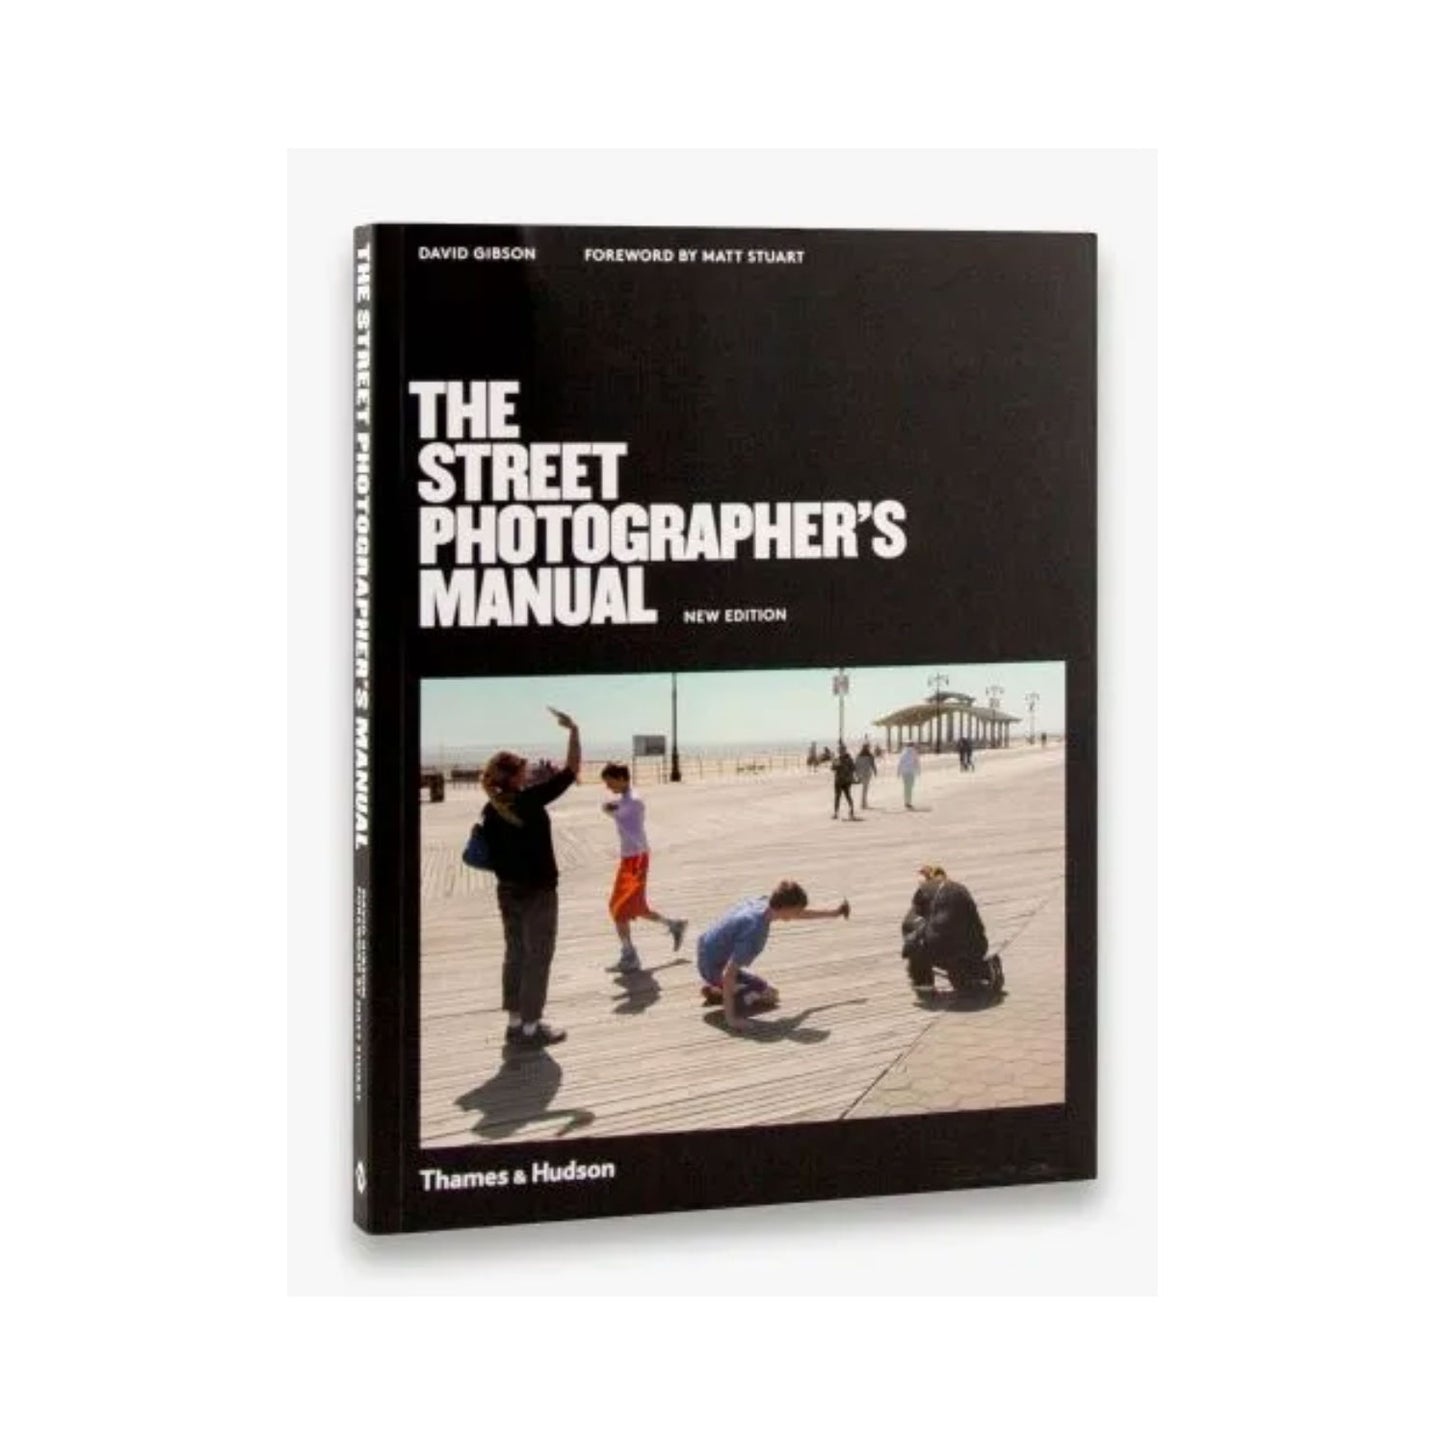 The Street Photographer’s Manual by David Gibson. Photo Museum Ireland